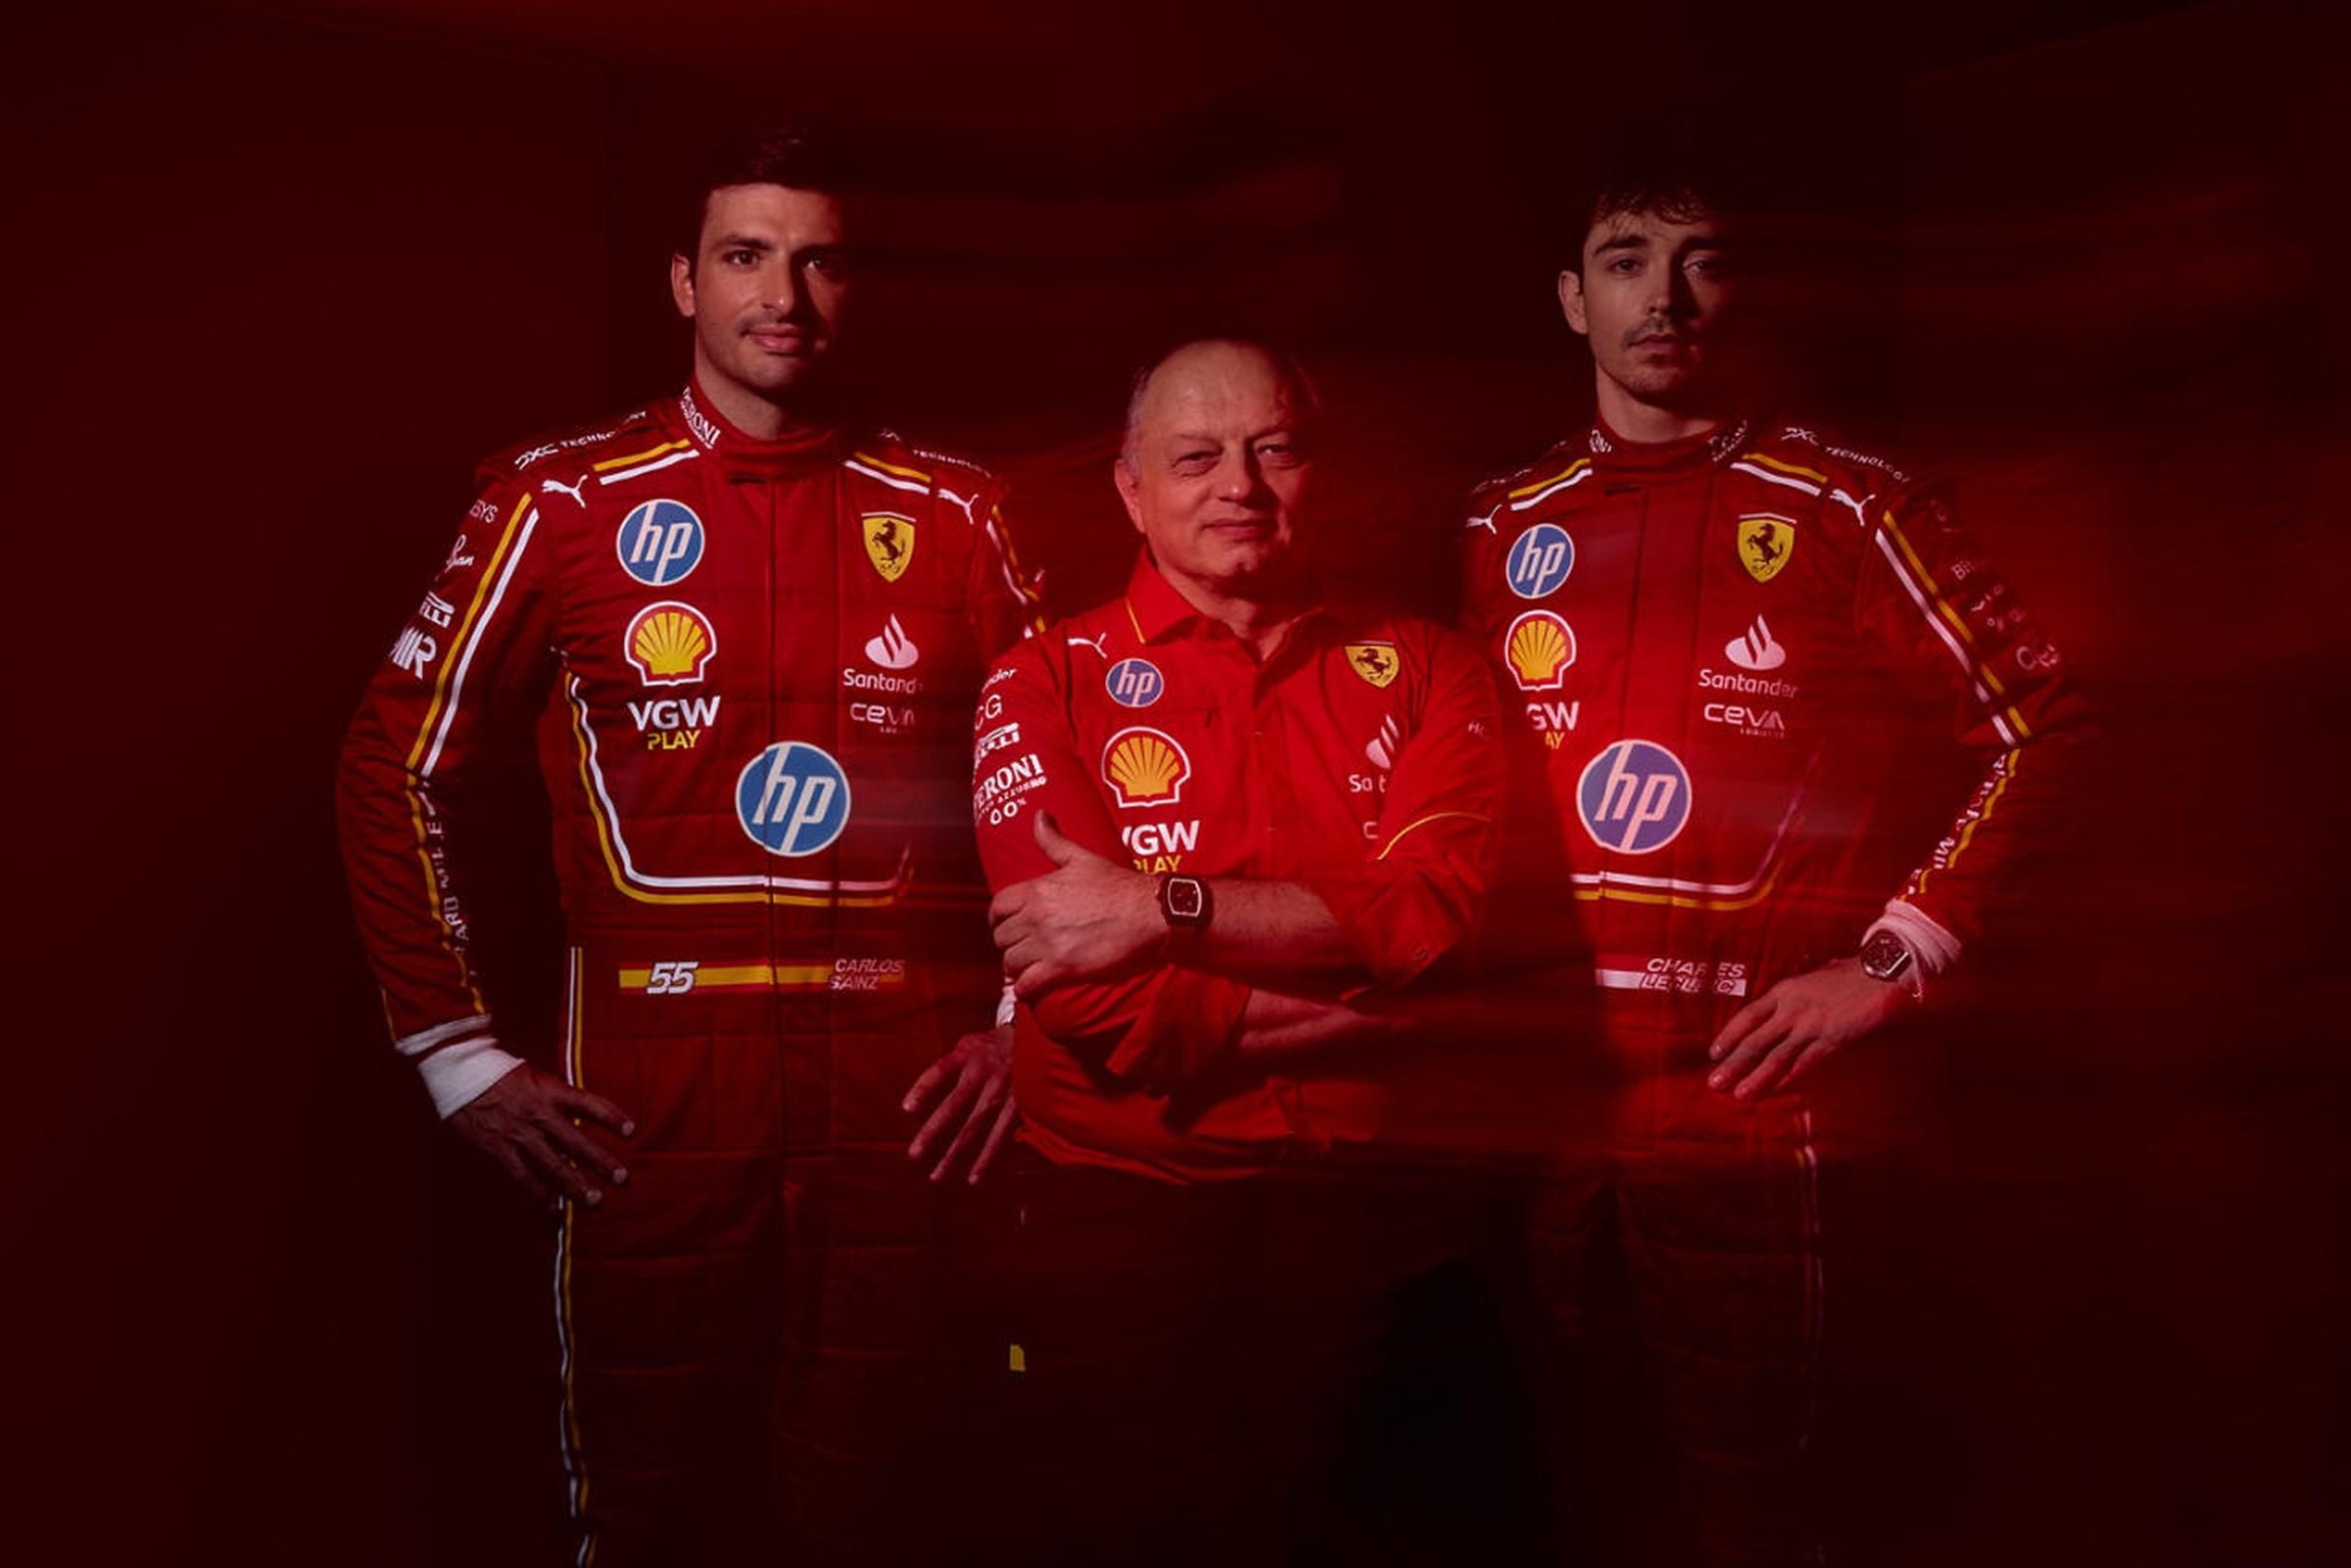 Three people in red racing uniforms pose for a photo.